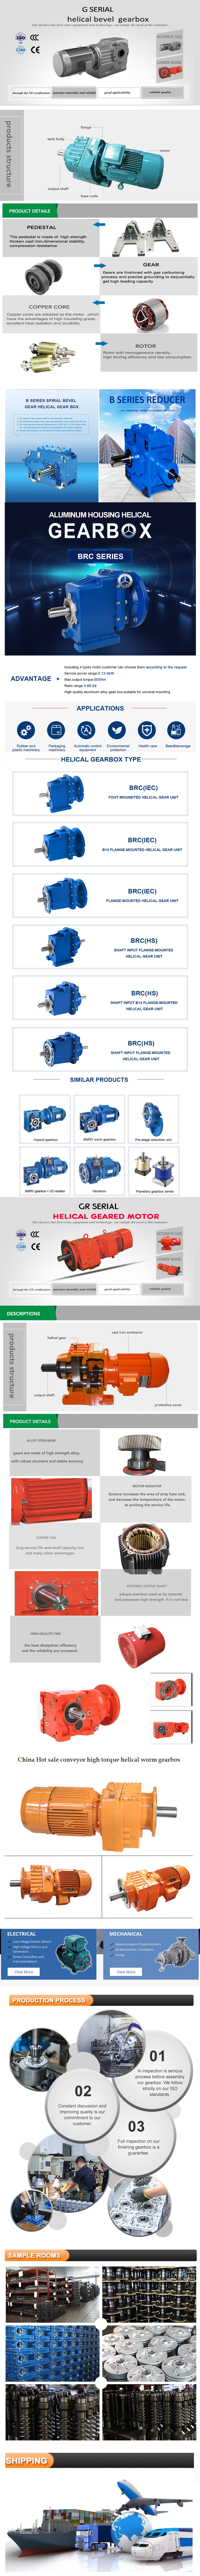   in Calamba Philippines  sales   price   shop   near me   near me shop   factory   supplier China Factory Atg Pgh Series Pgh High Precision Low Backlash Servo Motor Planetary Gearbox manufacturer   best   Cost   Custom   Cheap   wholesaler 